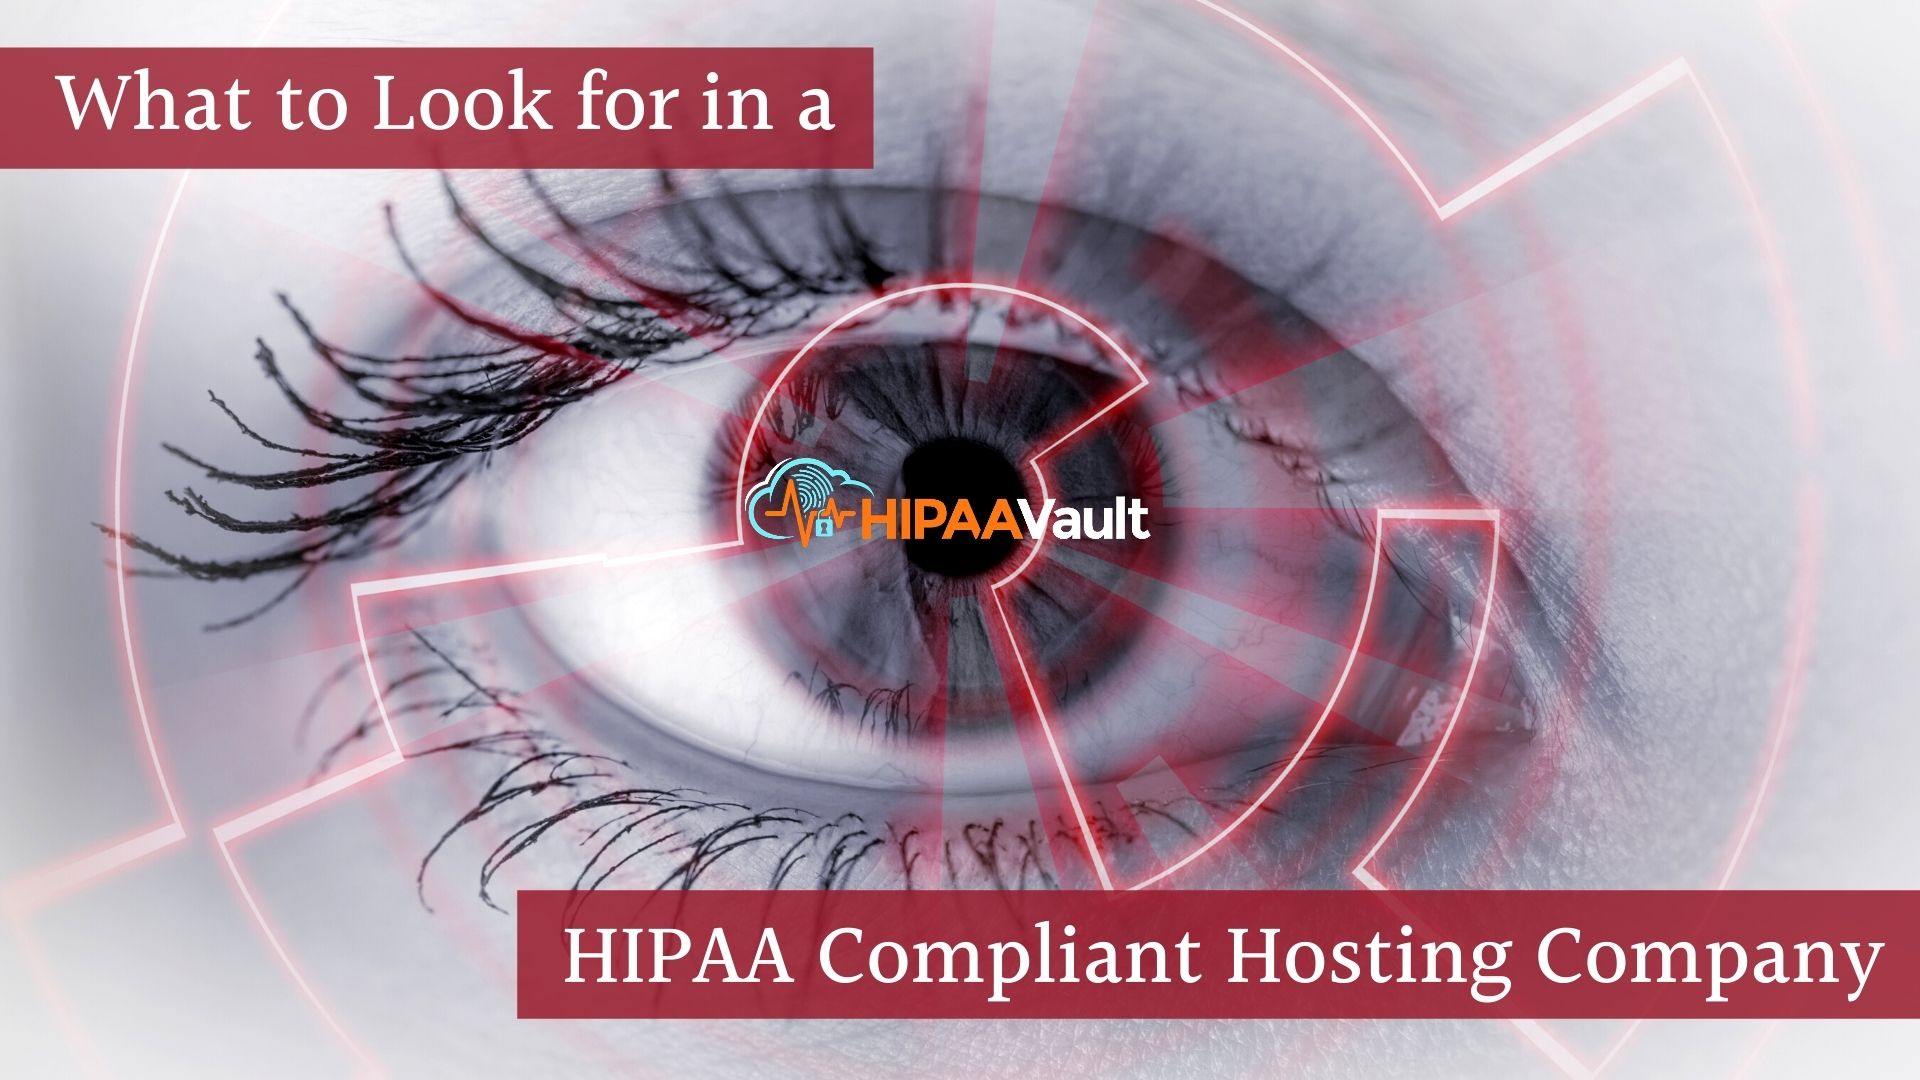 Ten Essentials to Look for in a HIPAA Compliant Hosting Company